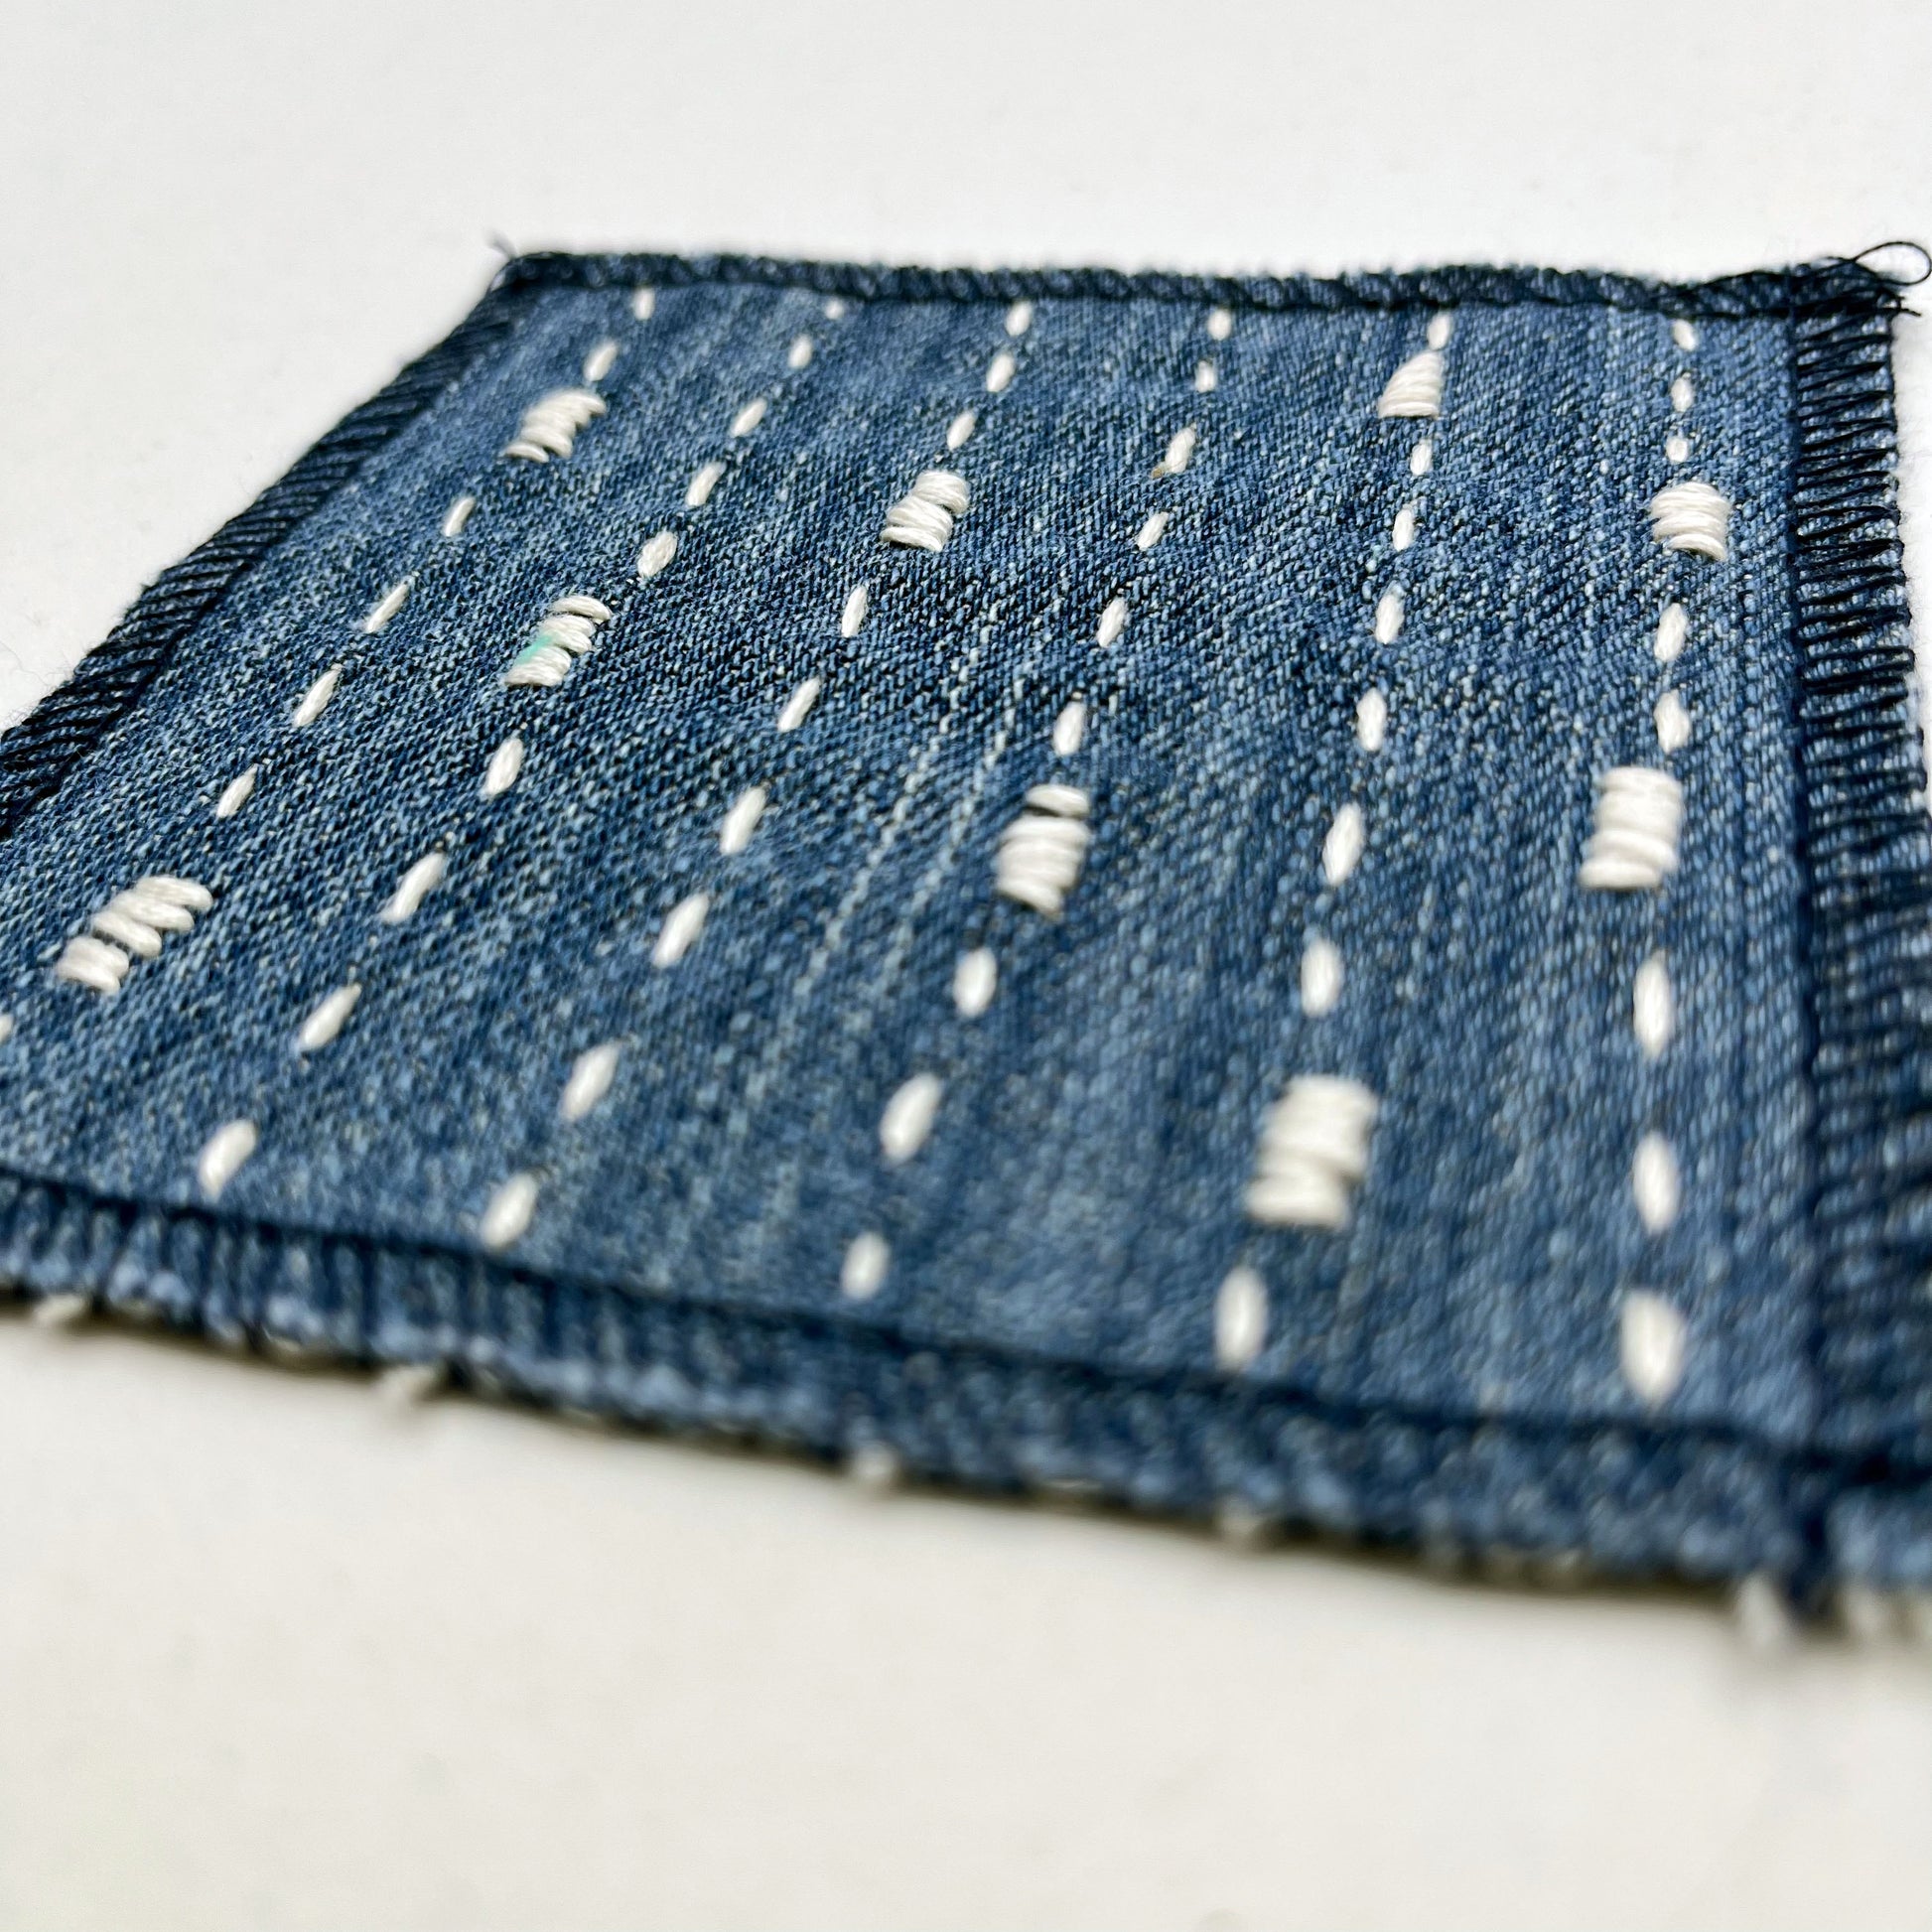 close up angled view of a square patch made out of denim, handstitched with ivory running stitches with randomly placed small rectangles made of stitches running the other direction, with overlocked edges, on a white background